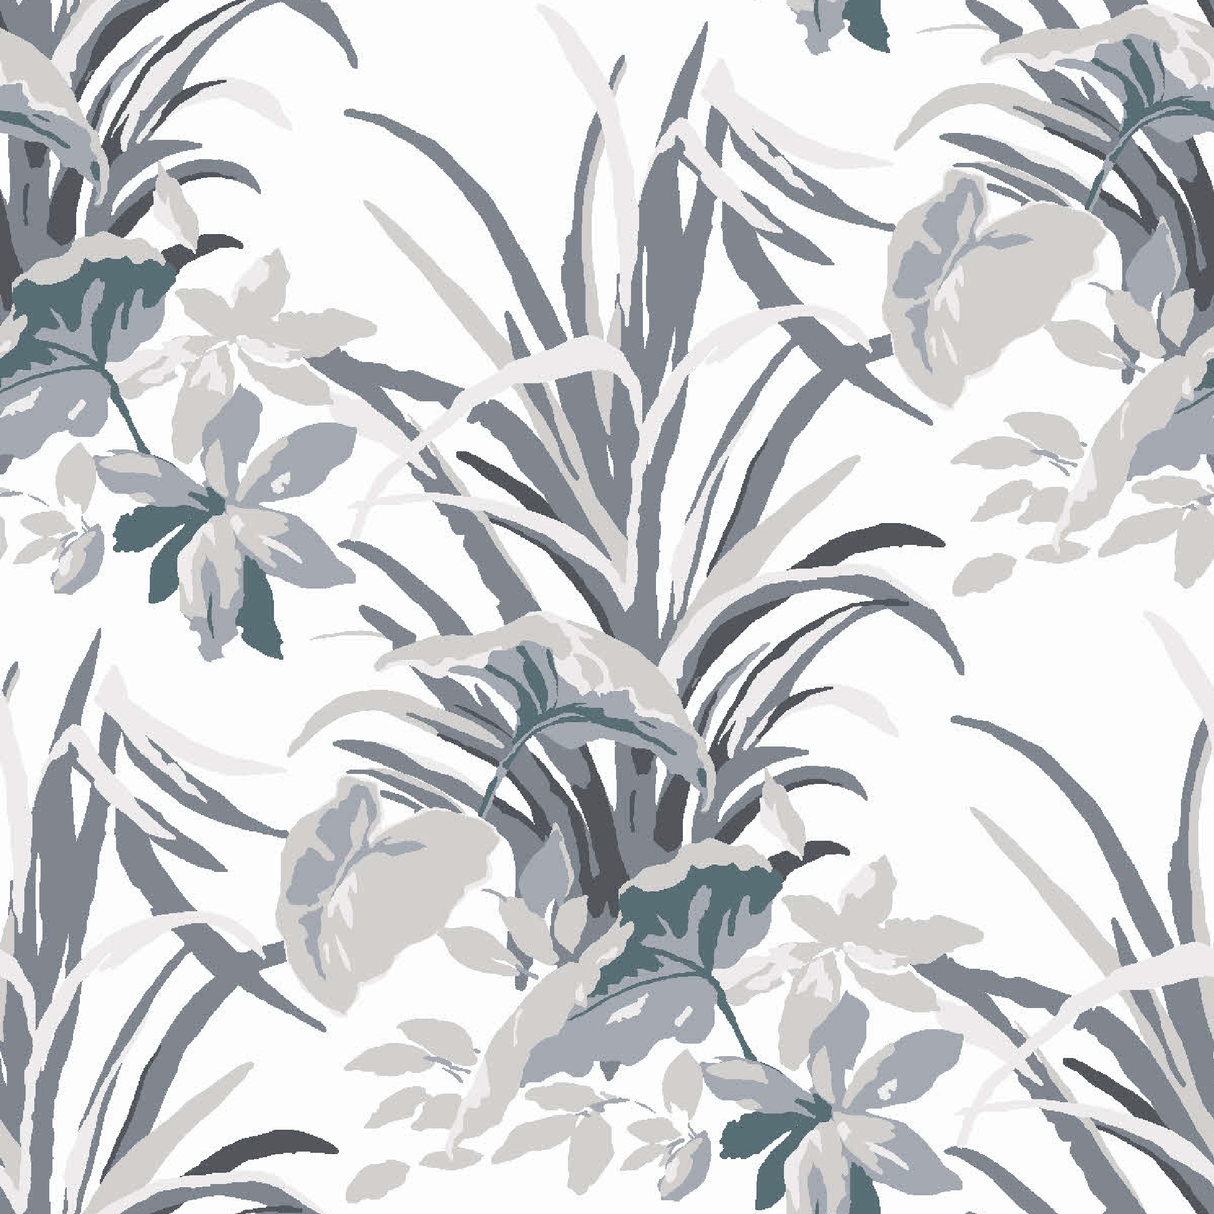 Jungle Road Fabric by the Yard